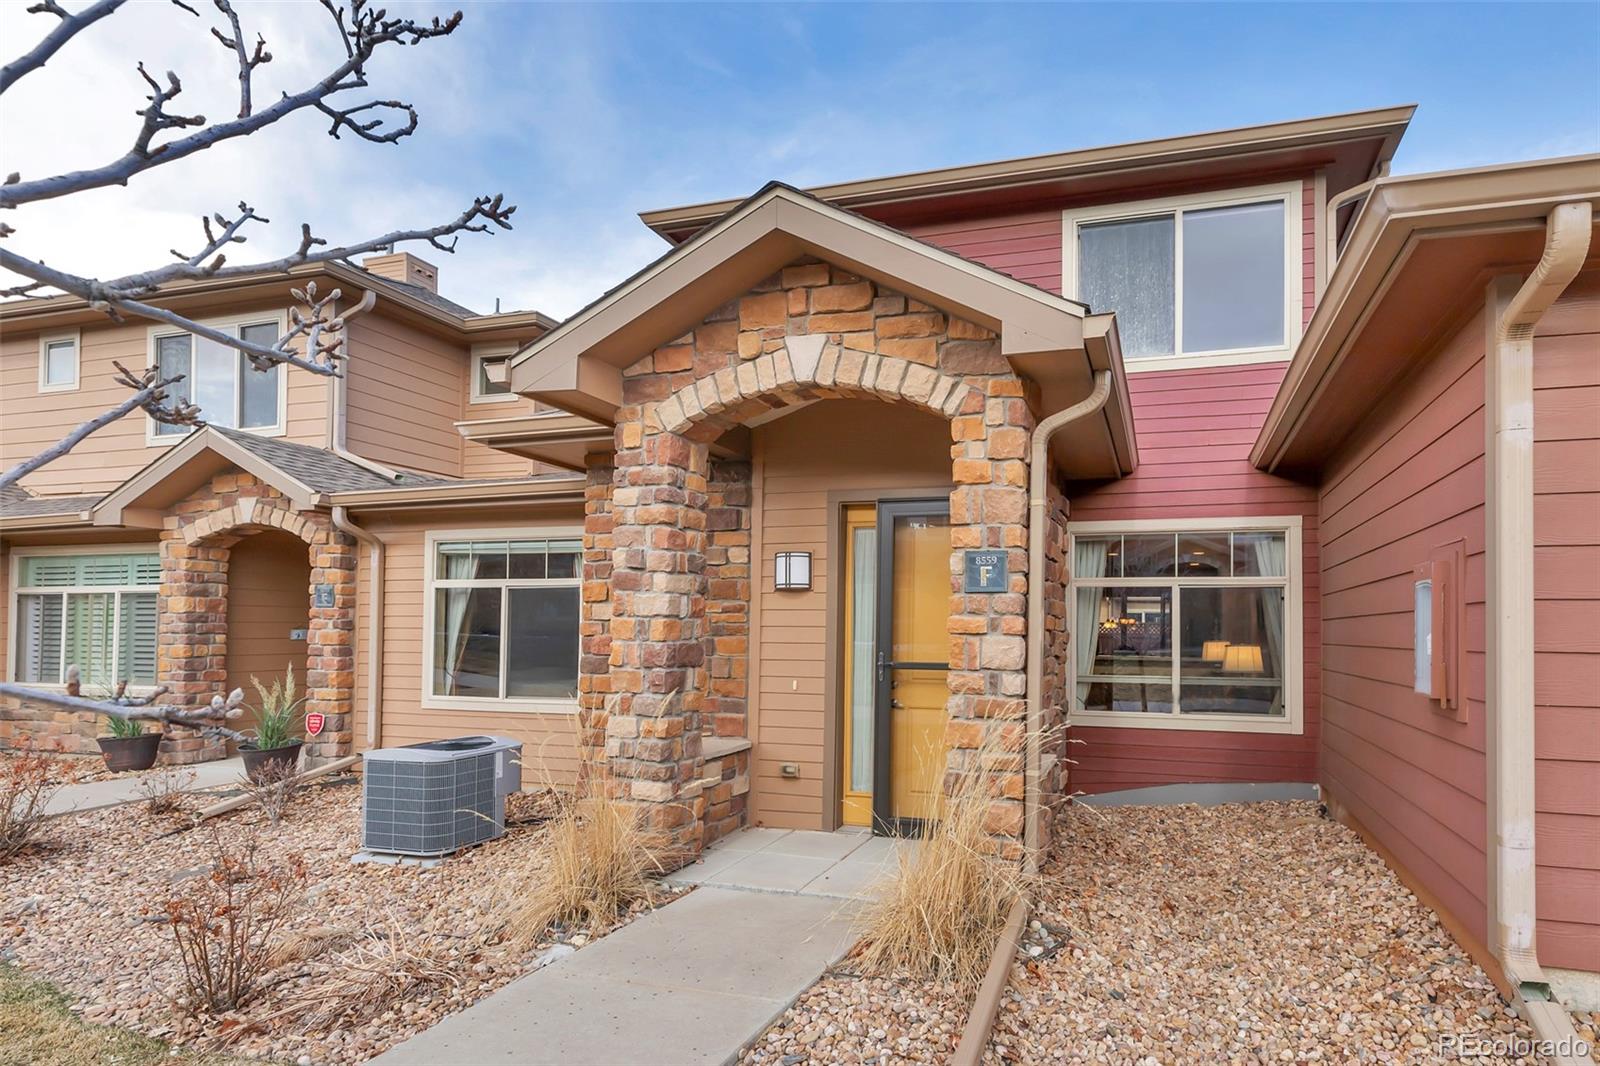 8559  gold peak drive, Highlands Ranch sold home. Closed on 2024-04-02 for $644,900.